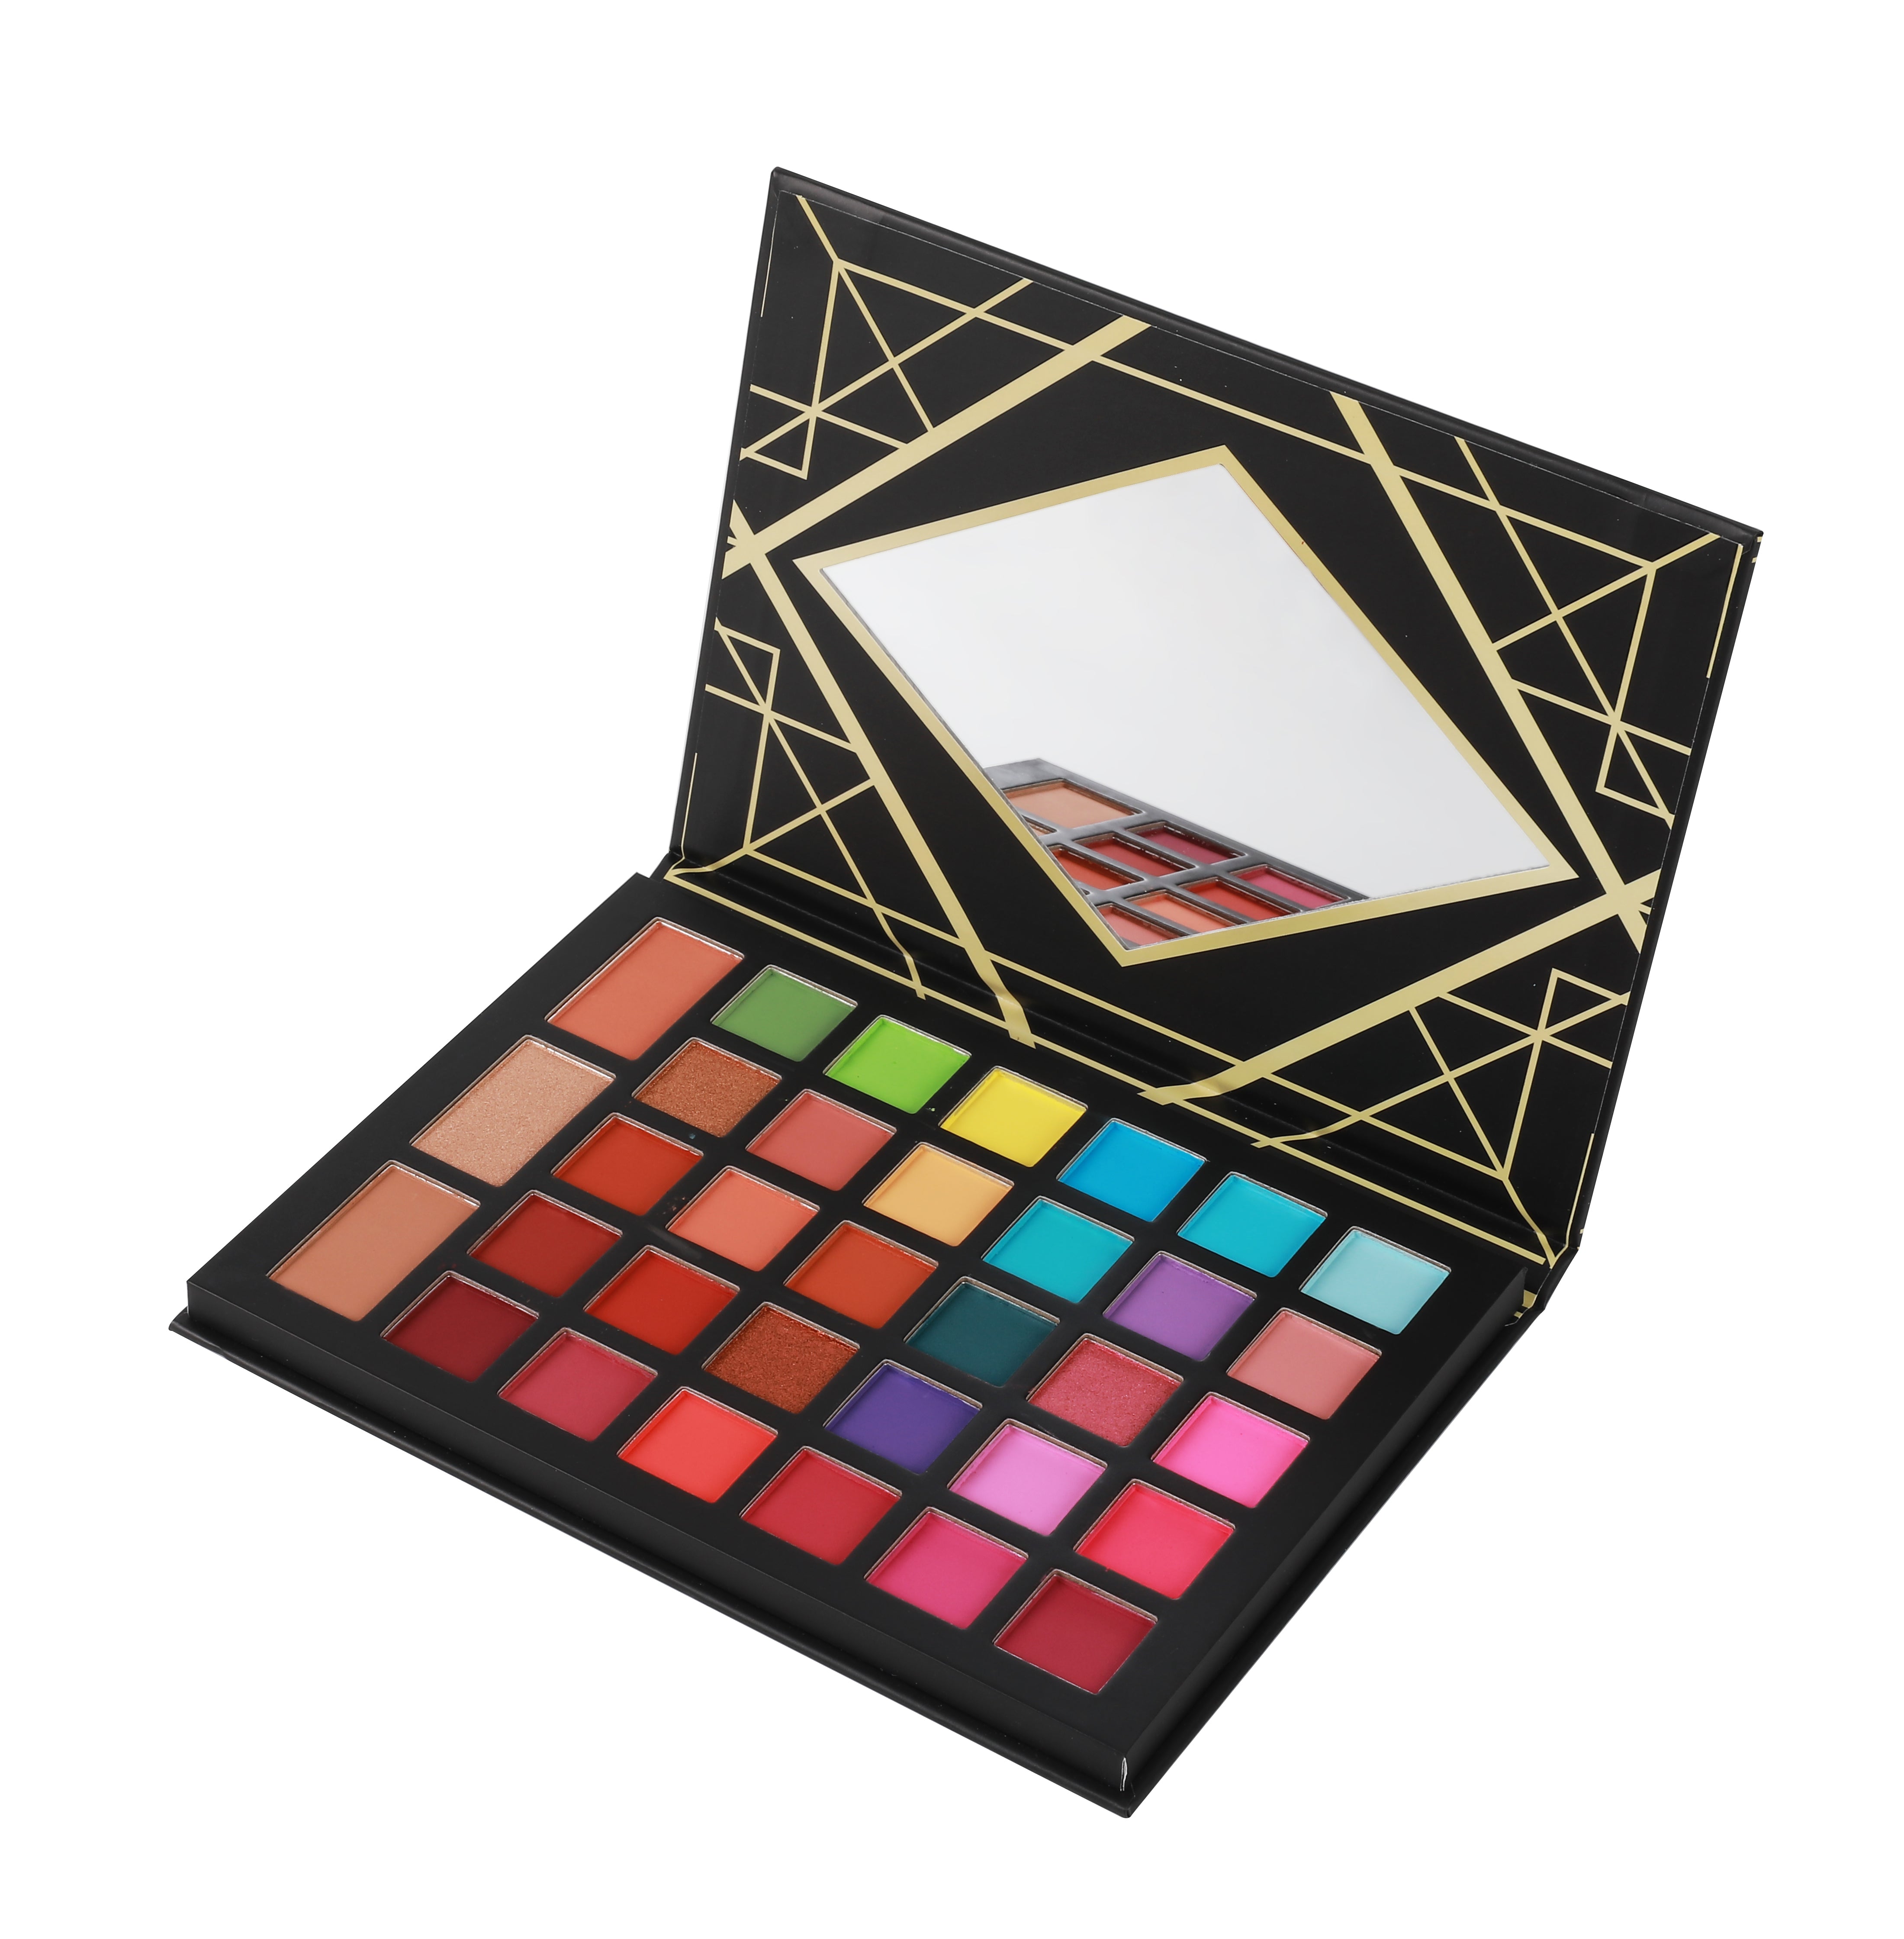 PXLOOK GATSBY CONFESSIONS EYESHADOW PALETTE